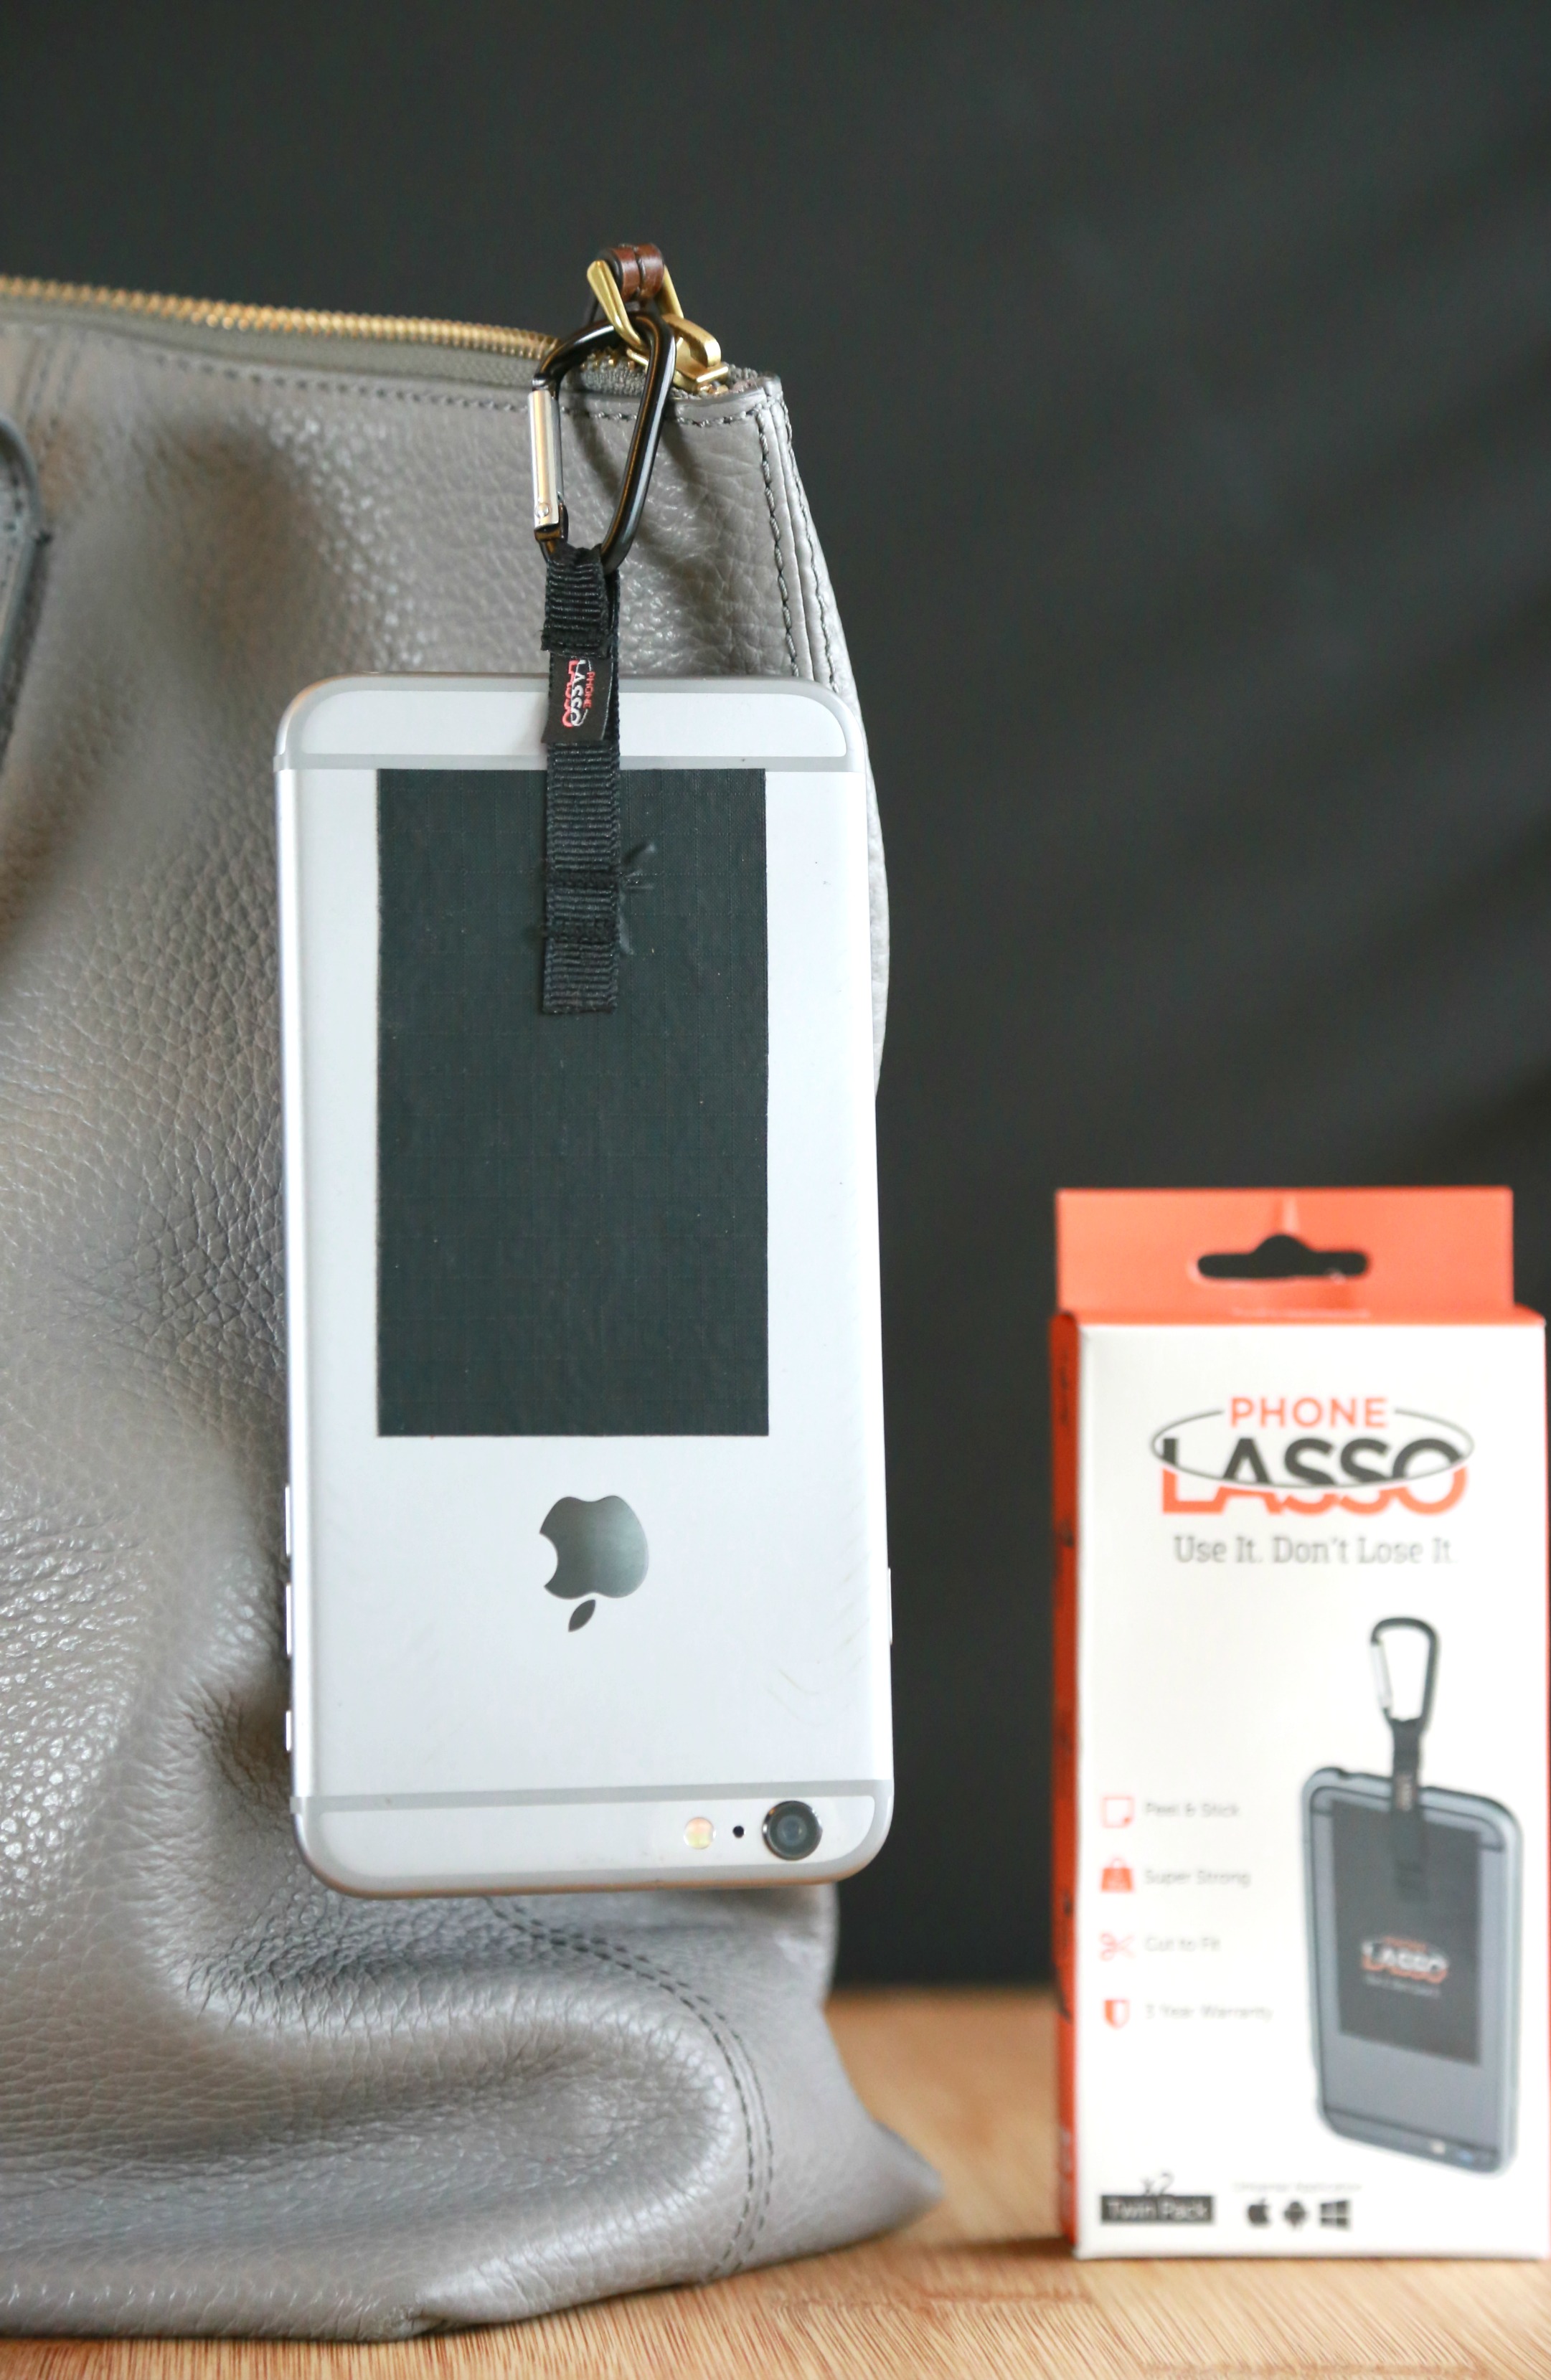 The Phone Lasso keeps your phone safe from falls or from being left and lost. See how the Phone Lasso works and why you need one to protect your investment.